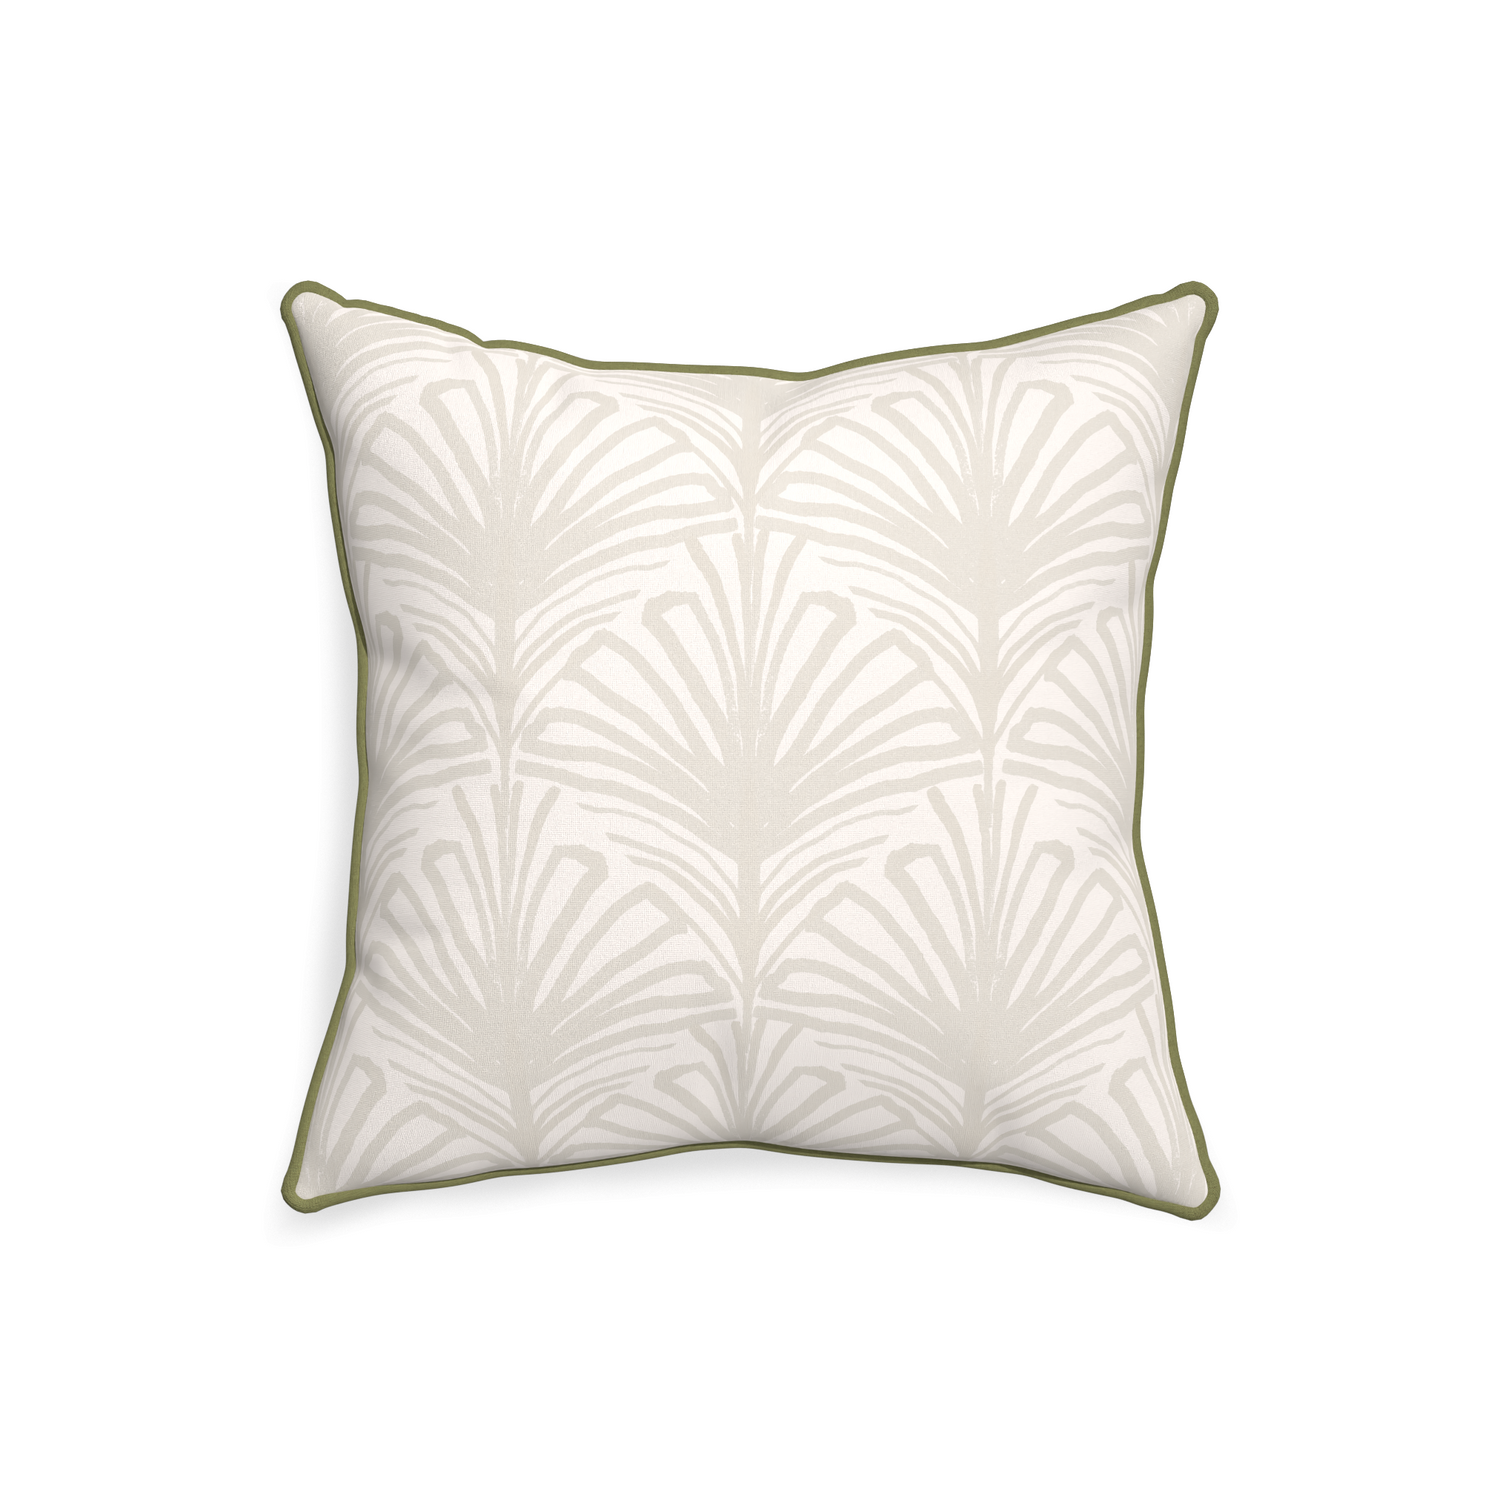 20-square suzy sand custom pillow with moss piping on white background